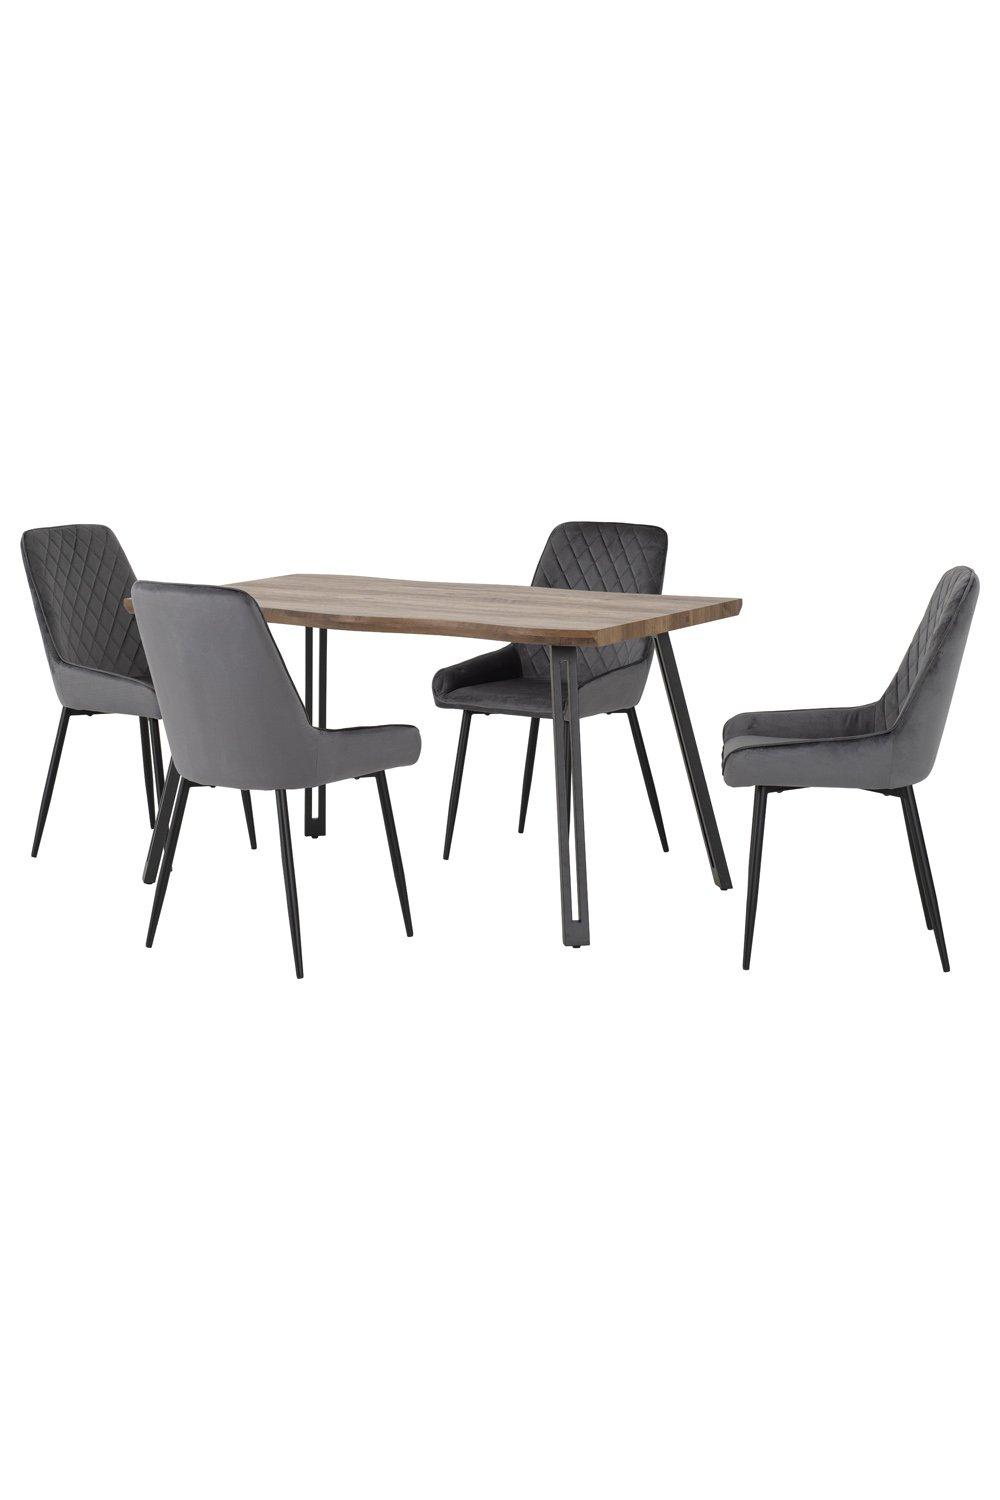 Quebec Wave Edge Dining Set with Avery Chairs